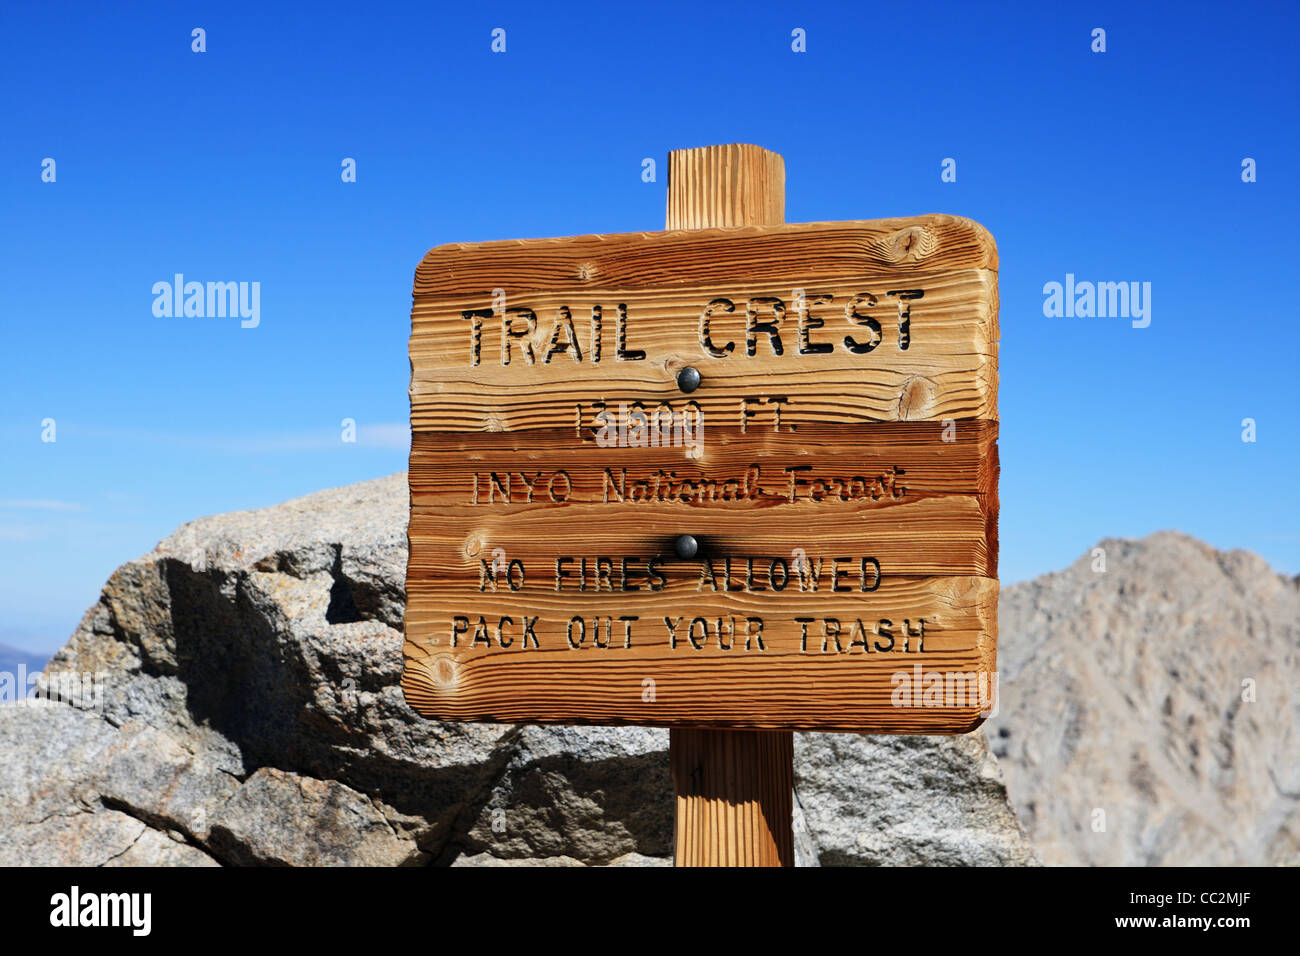 Trail Crest sign at thirteen thousand six hundred feet on the way up Mount Whitney Stock Photo